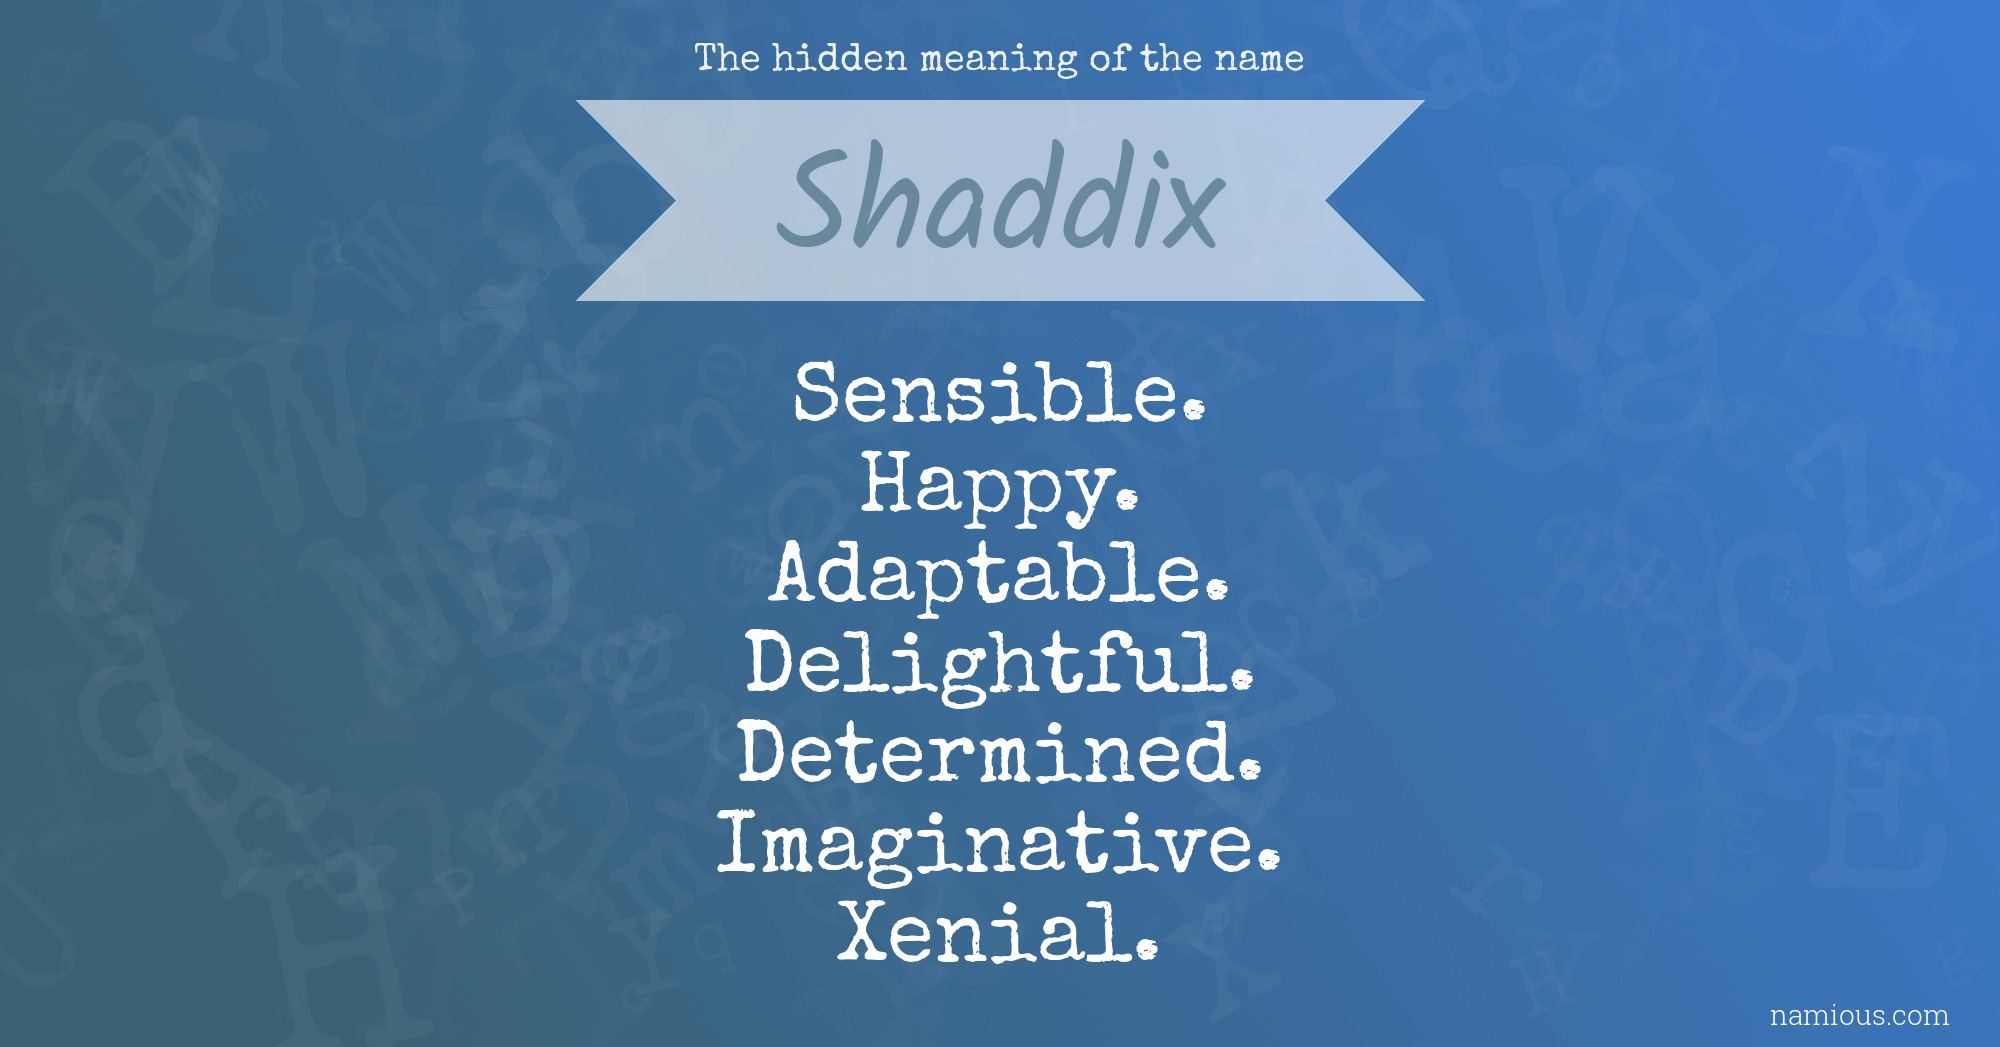 The hidden meaning of the name Shaddix